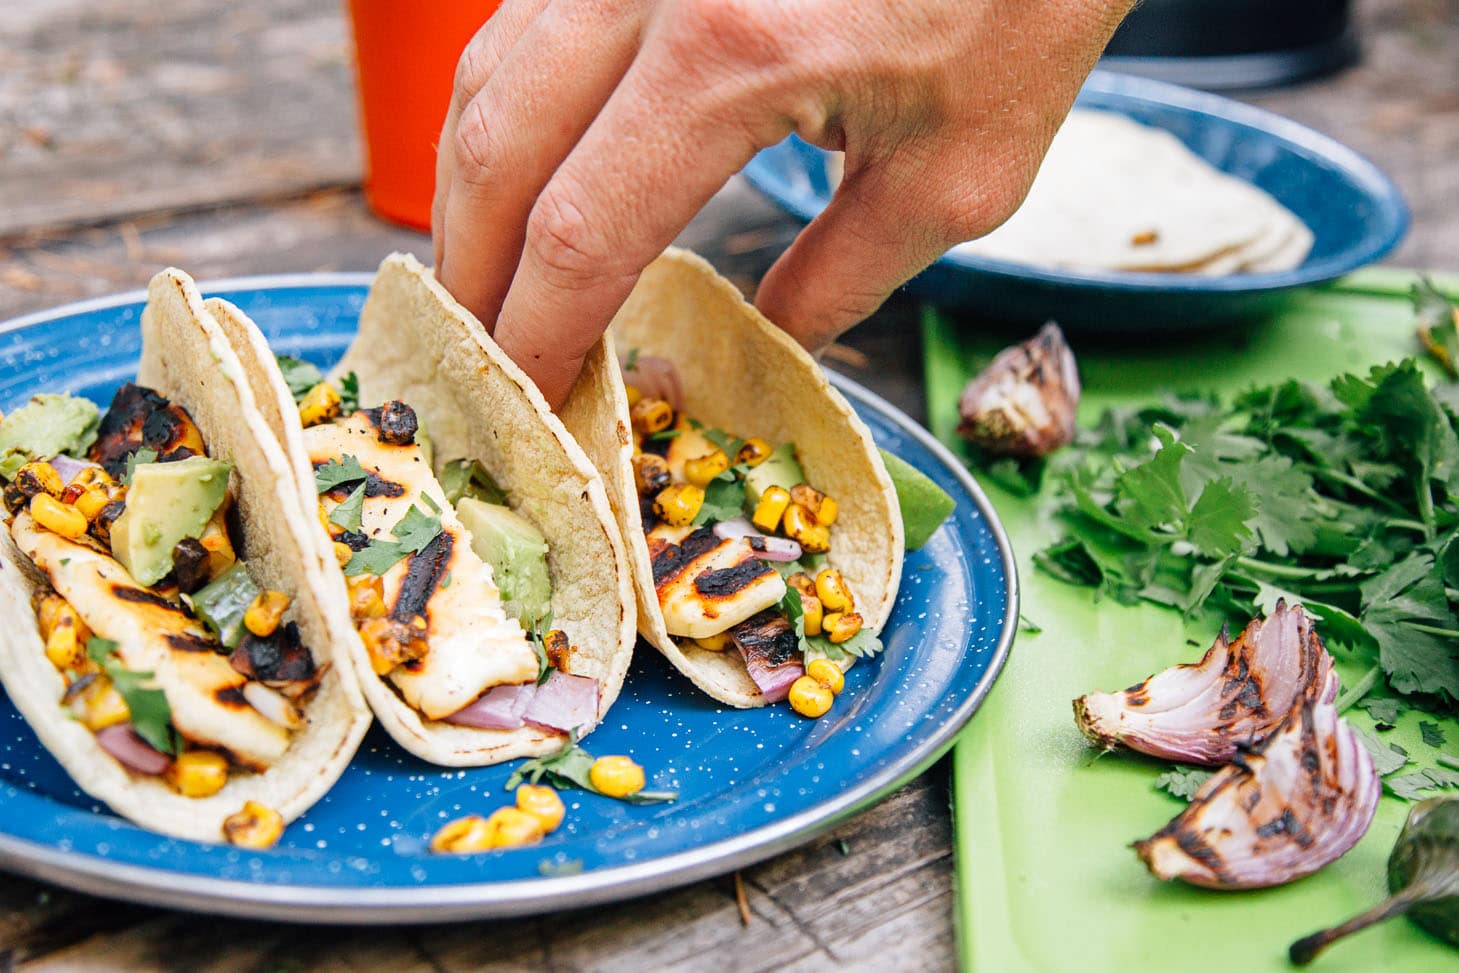 These Grilled Halloumi Tacos are a great vegetarian camping meal. Easy to prepare and even easier to clean up, this is simple camping food at it's best!